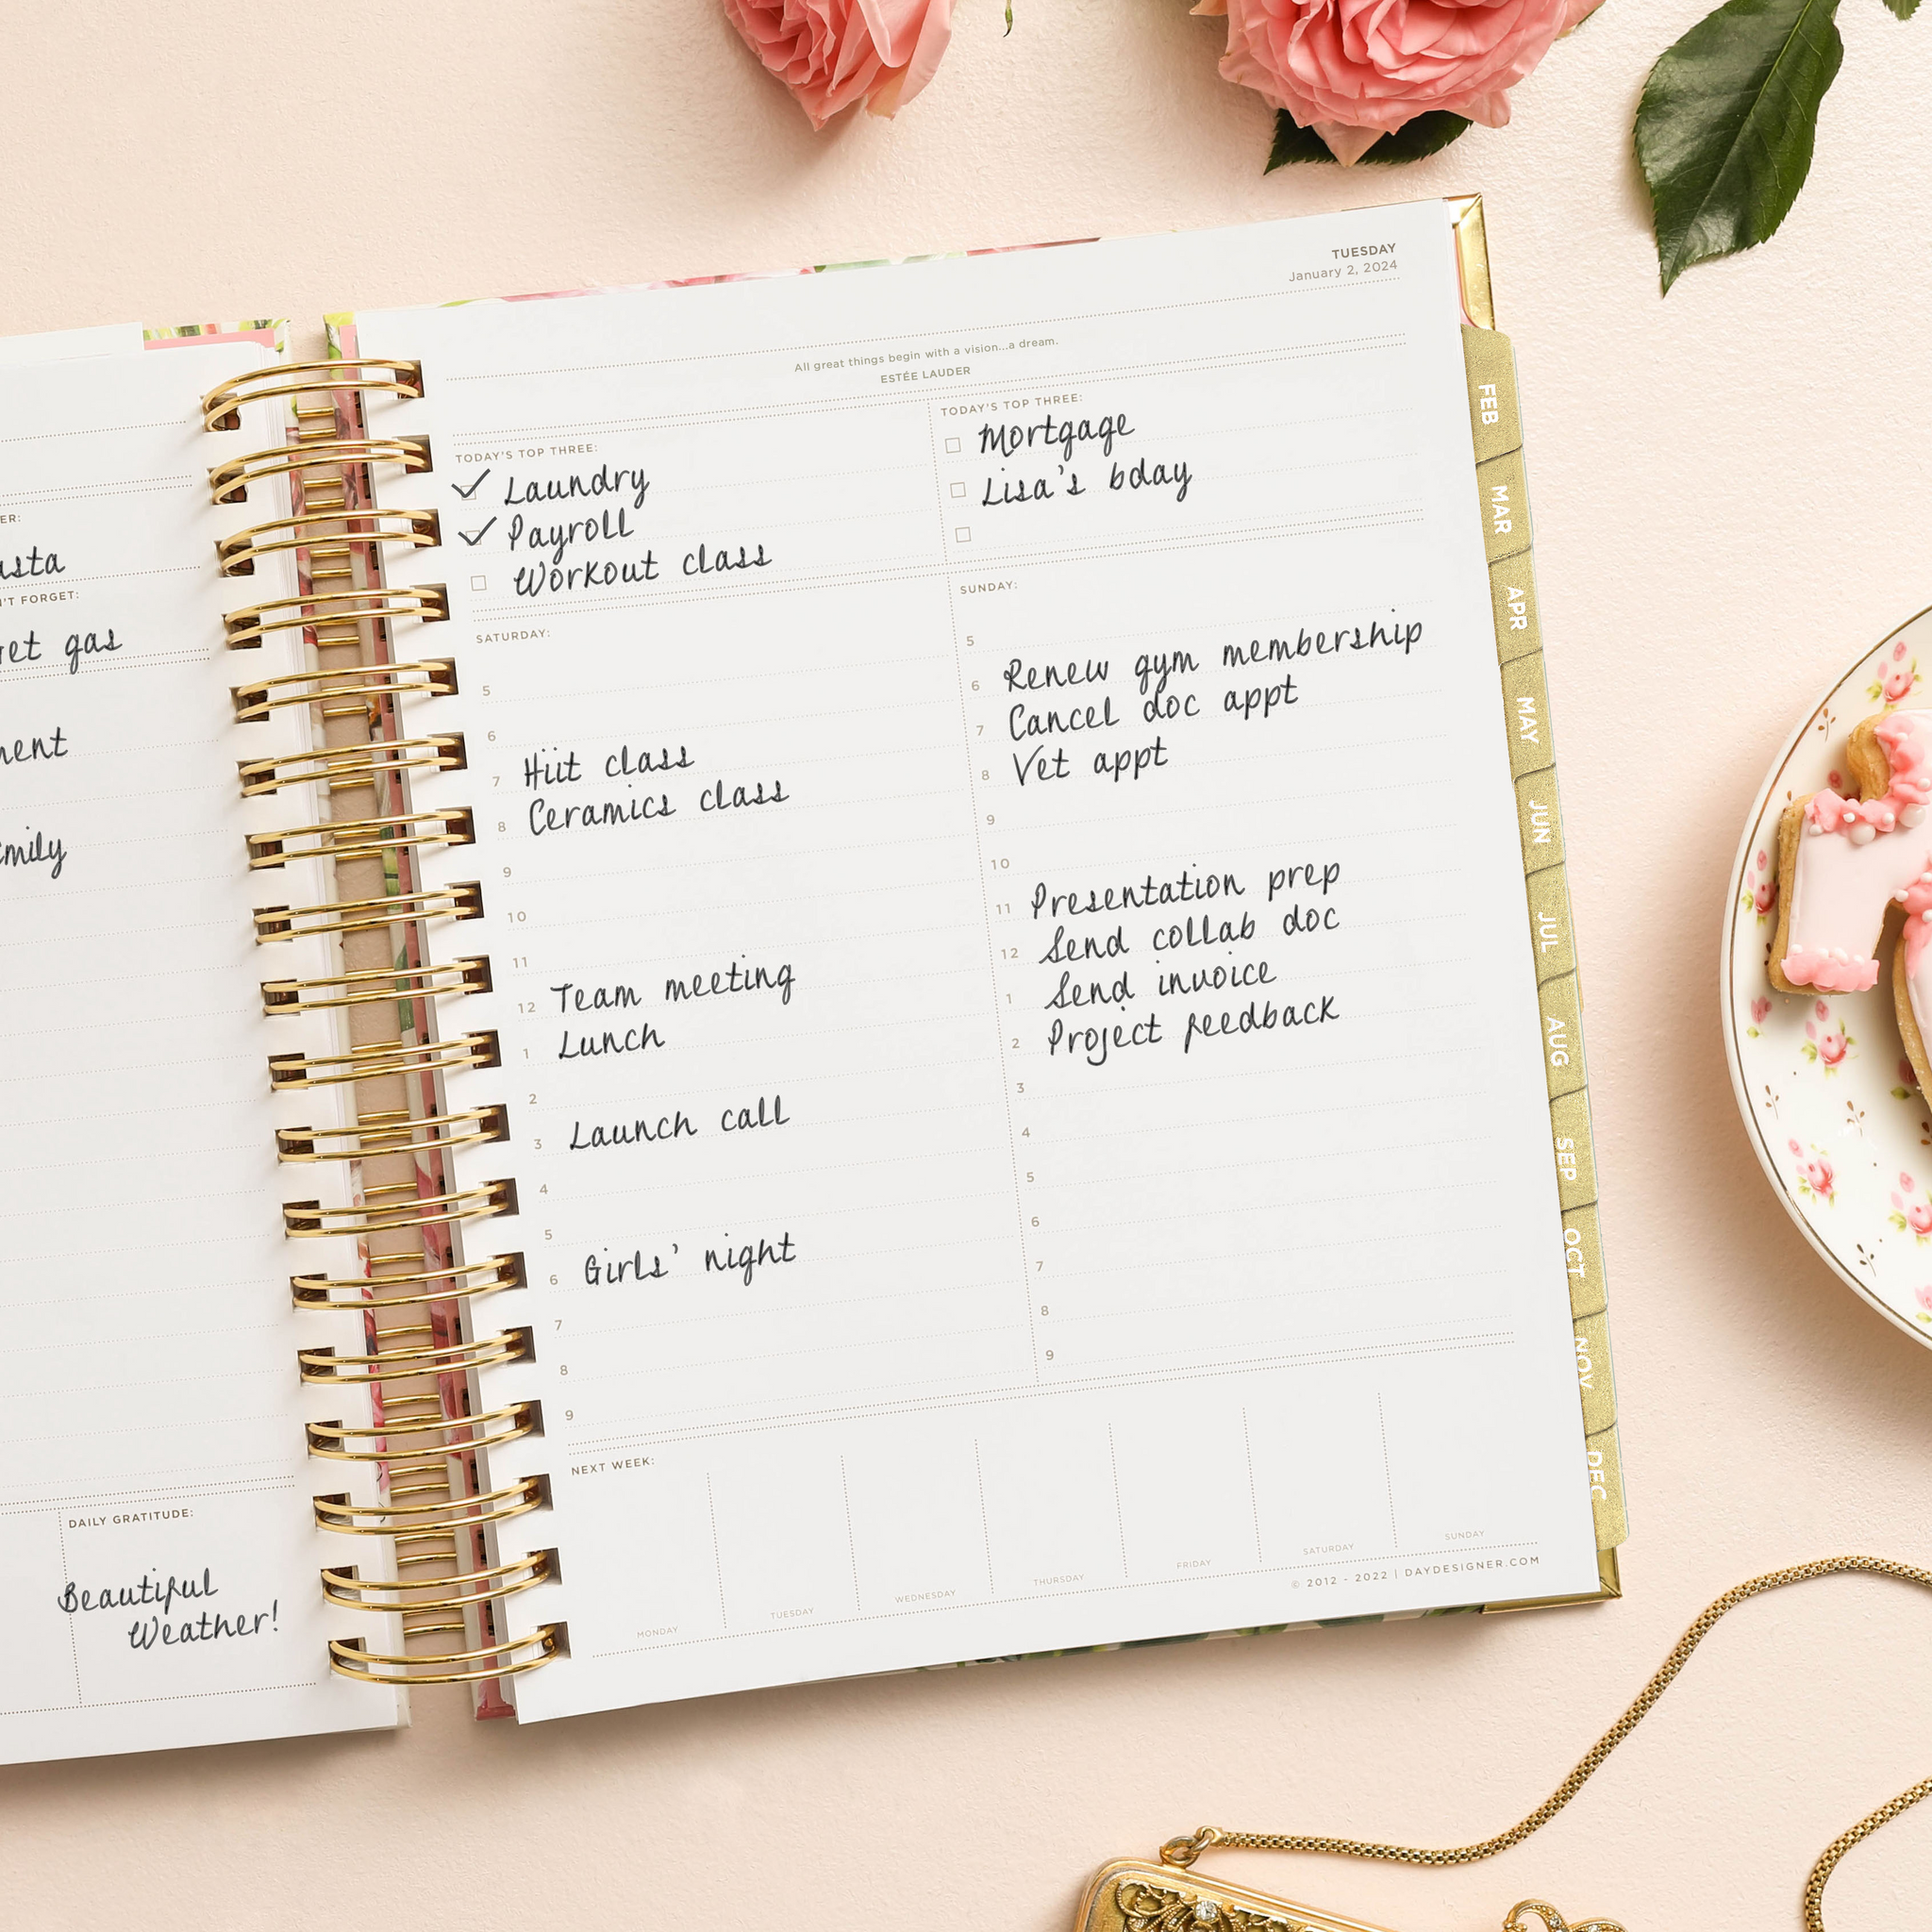 2024 Rose Gold Floral Annual Planner by Bright Day, Yearly Monthly Weekly  Daily Spiral Bound Dated Agenda Flexible Cover Tabbed Notebook, 8.25 x 6.25